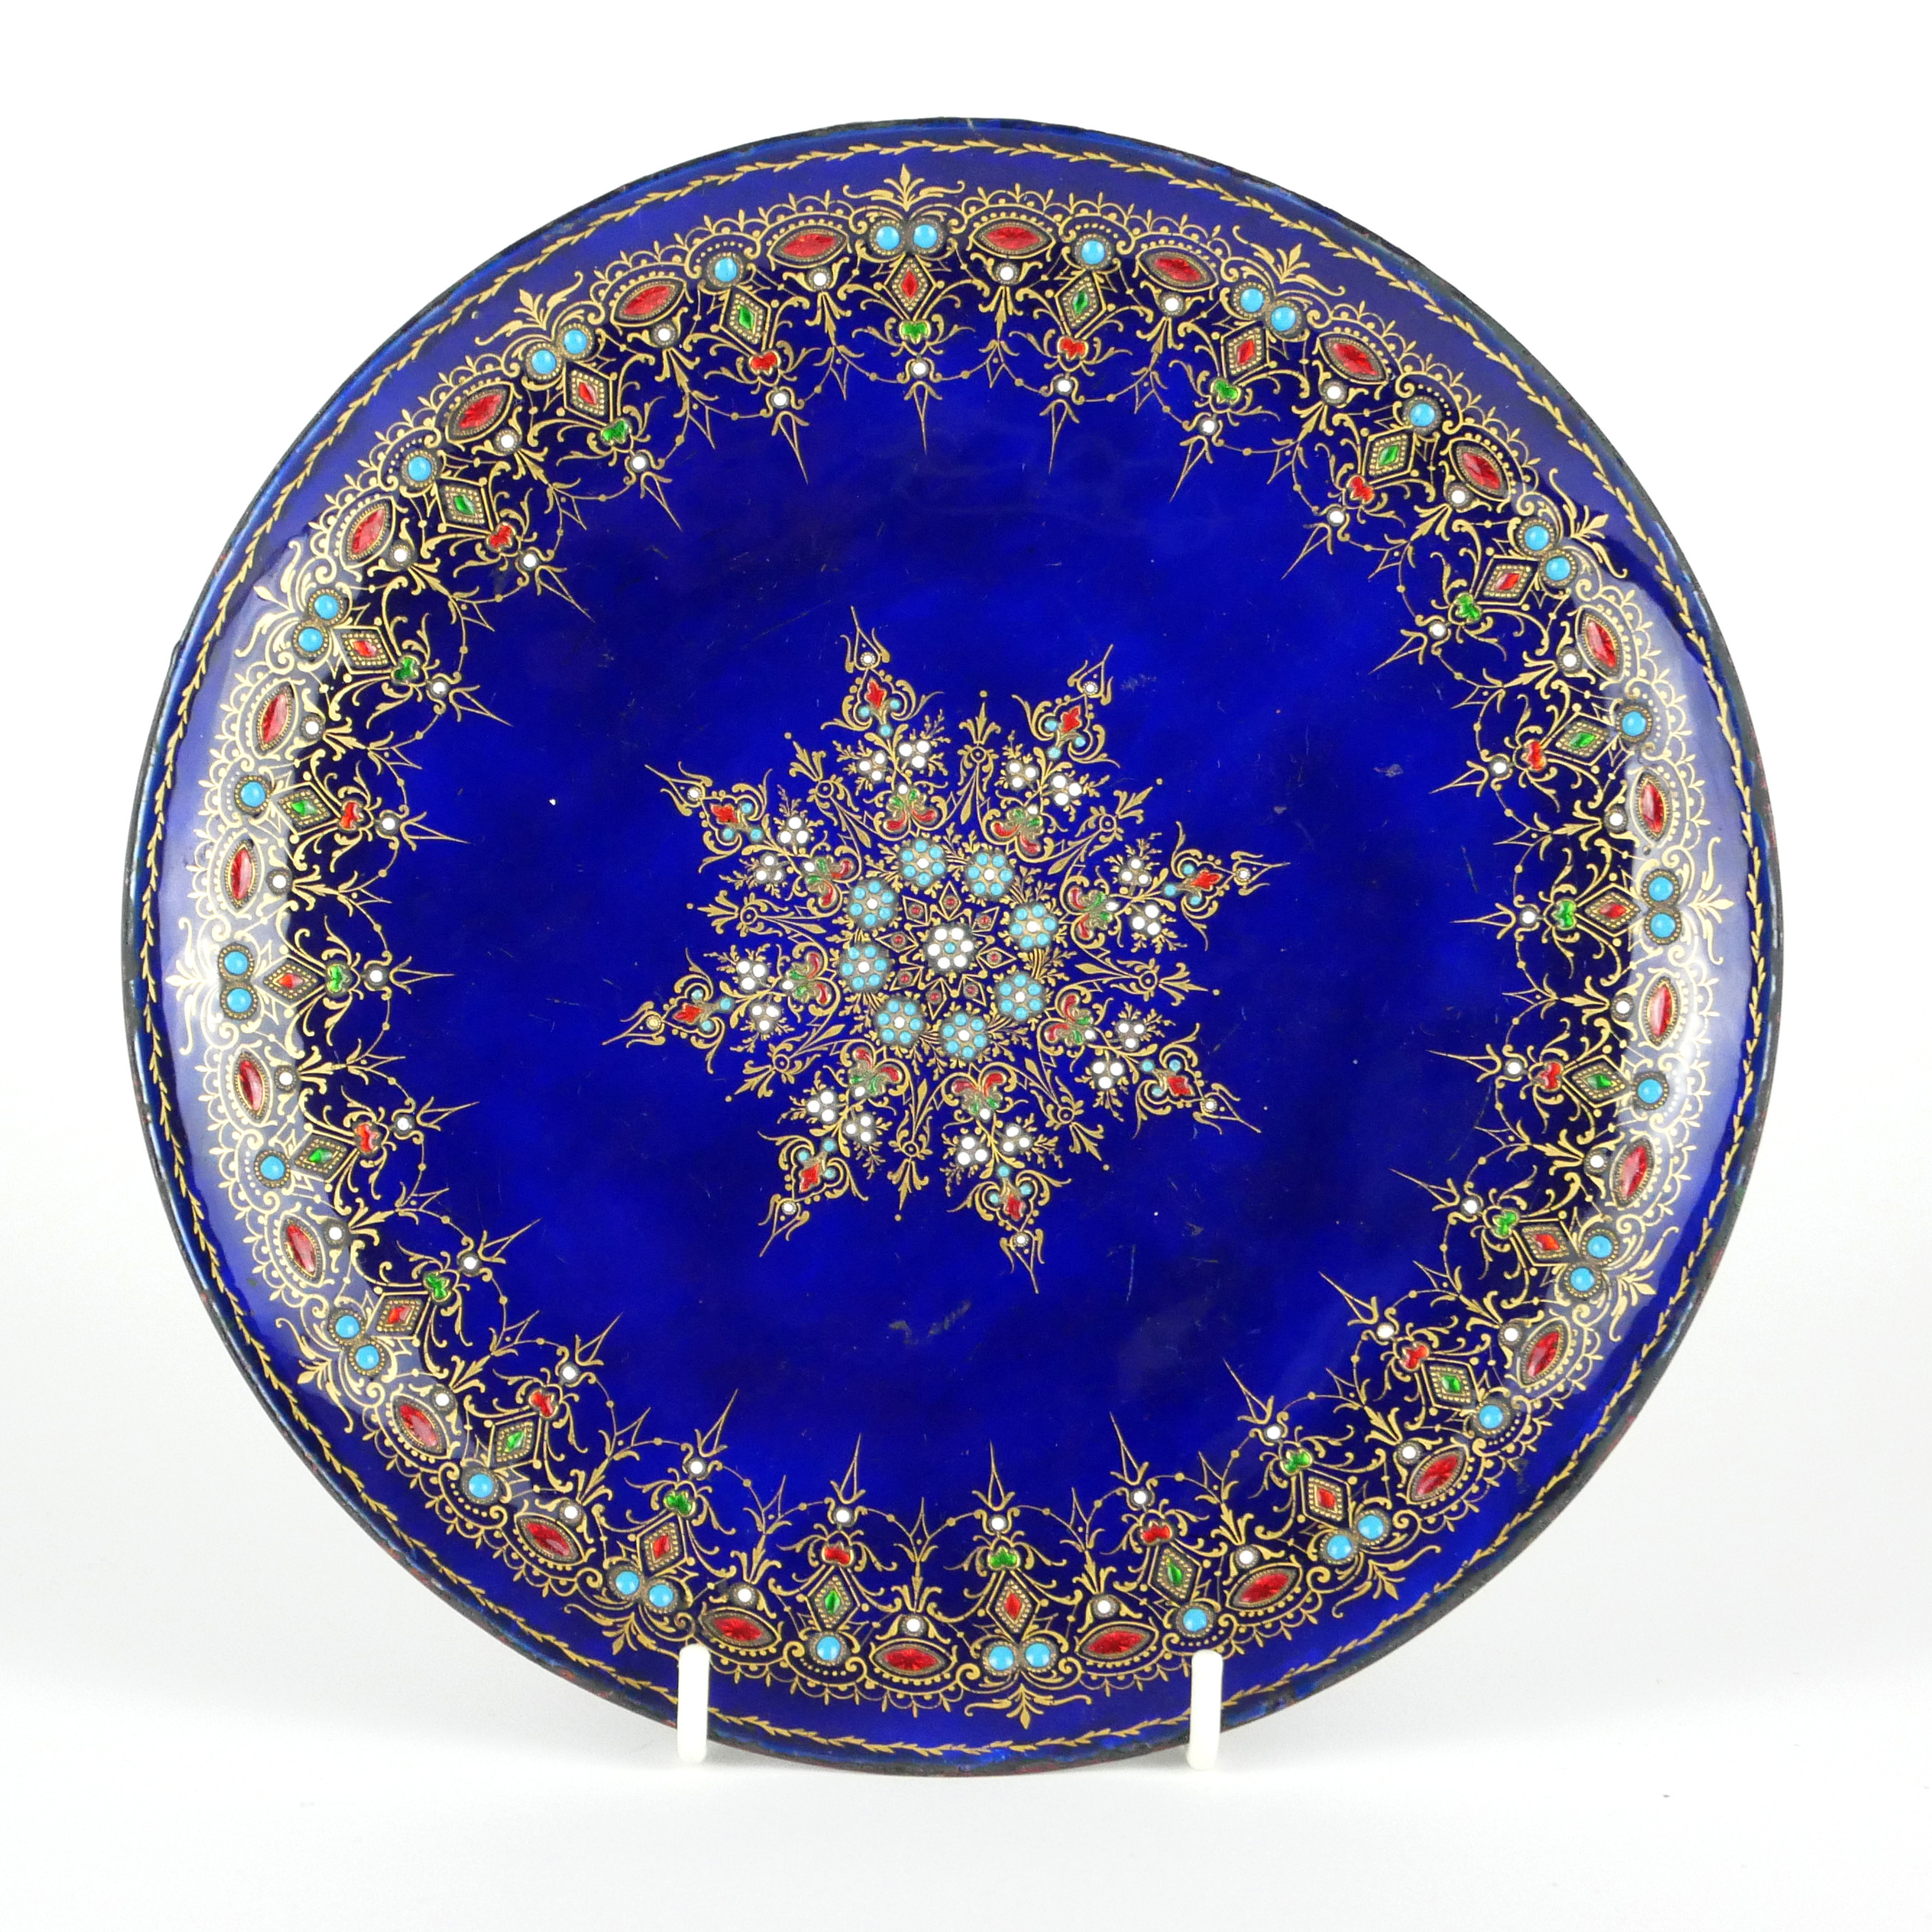 A 19TH CENTURY FRENCH LIMOGES ENAMELLED COPPER DISH Decorated with a central star-form motif